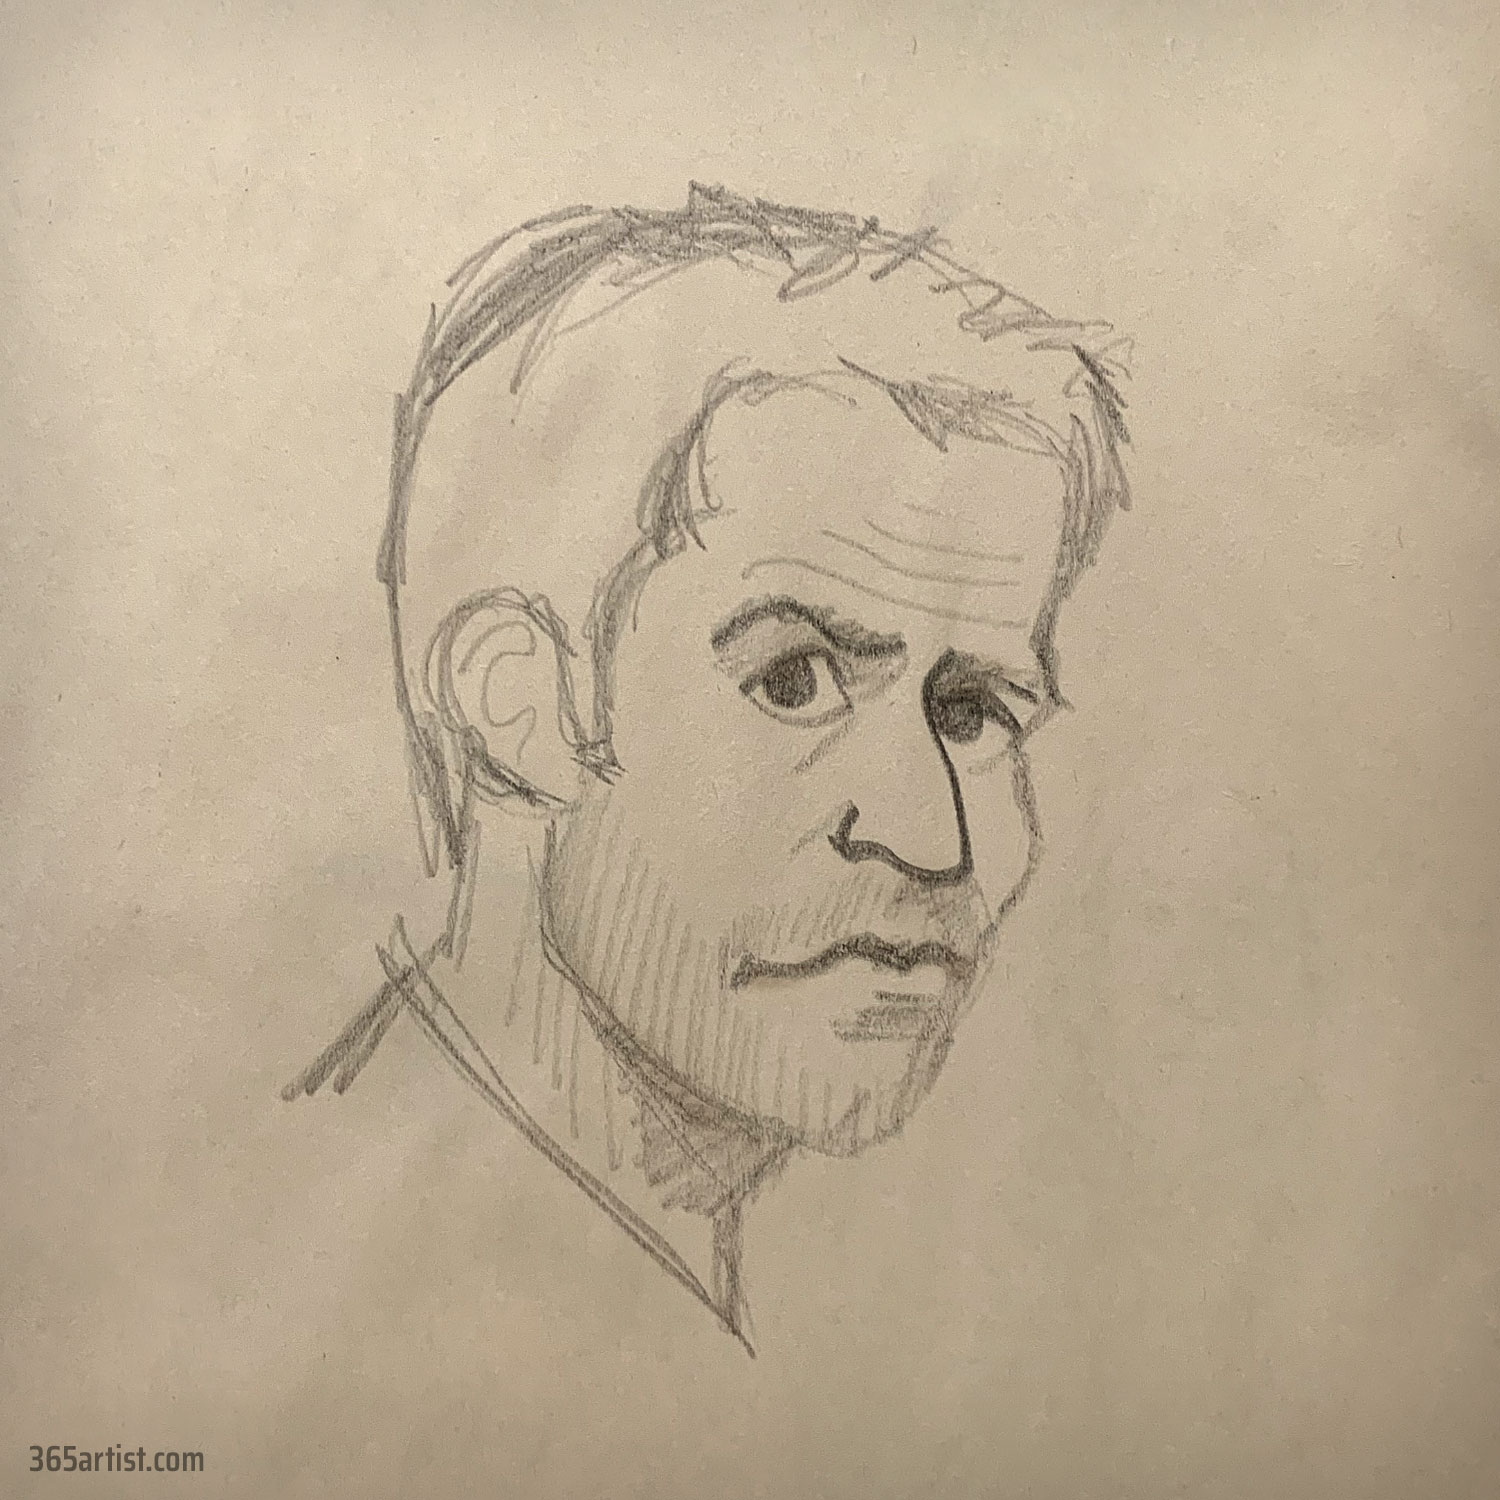 caricature drawing of an actor